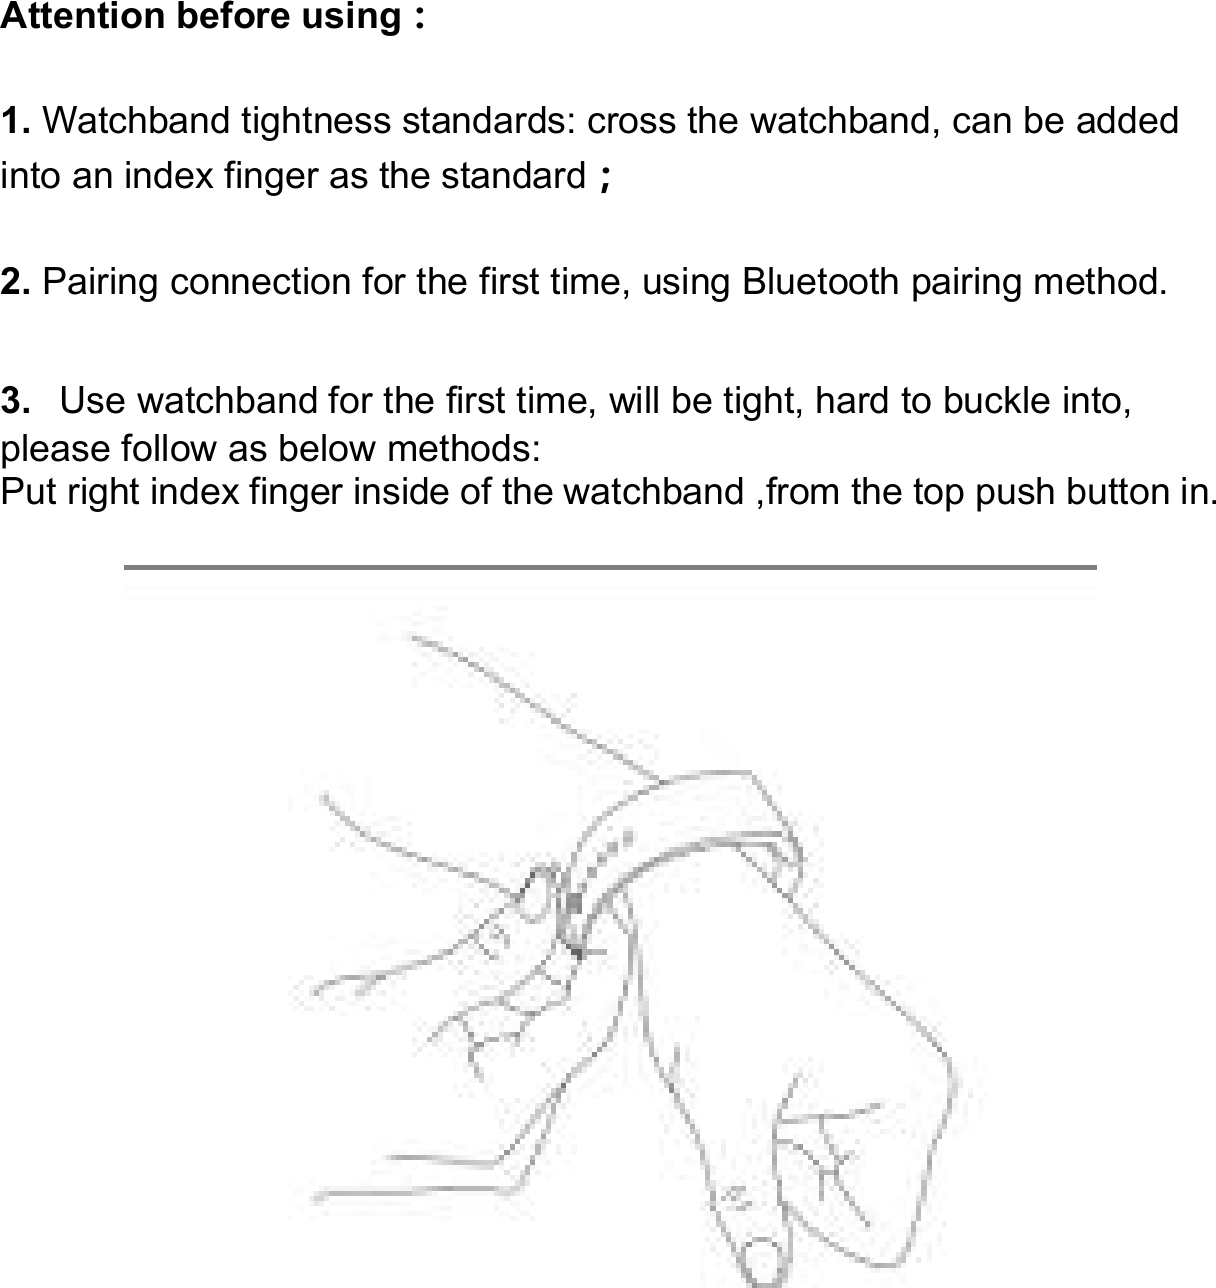     Attention before using： 1. Watchband tightness standards: cross the watchband, can be added into an index finger as the standard； 2. Pairing connection for the first time, using Bluetooth pairing method. 3.  Use watchband for the first time, will be tight, hard to buckle into, please follow as below methods: Put right index finger inside of the watchband ,from the top push button in.   